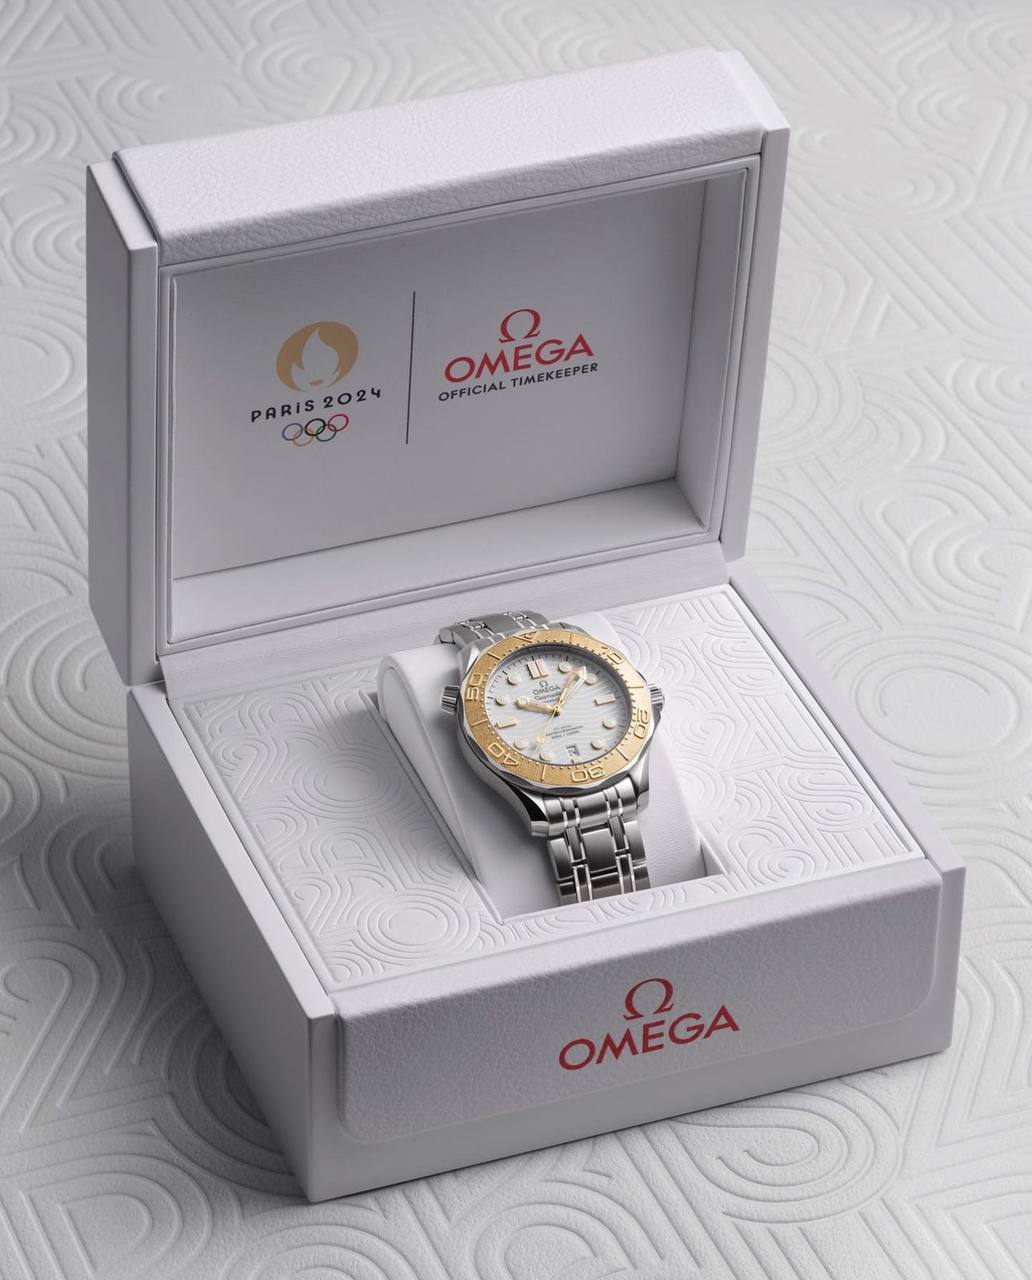 Omega has released the Omega Seamaster 300M 'Paris 2024' Limited Edition watch